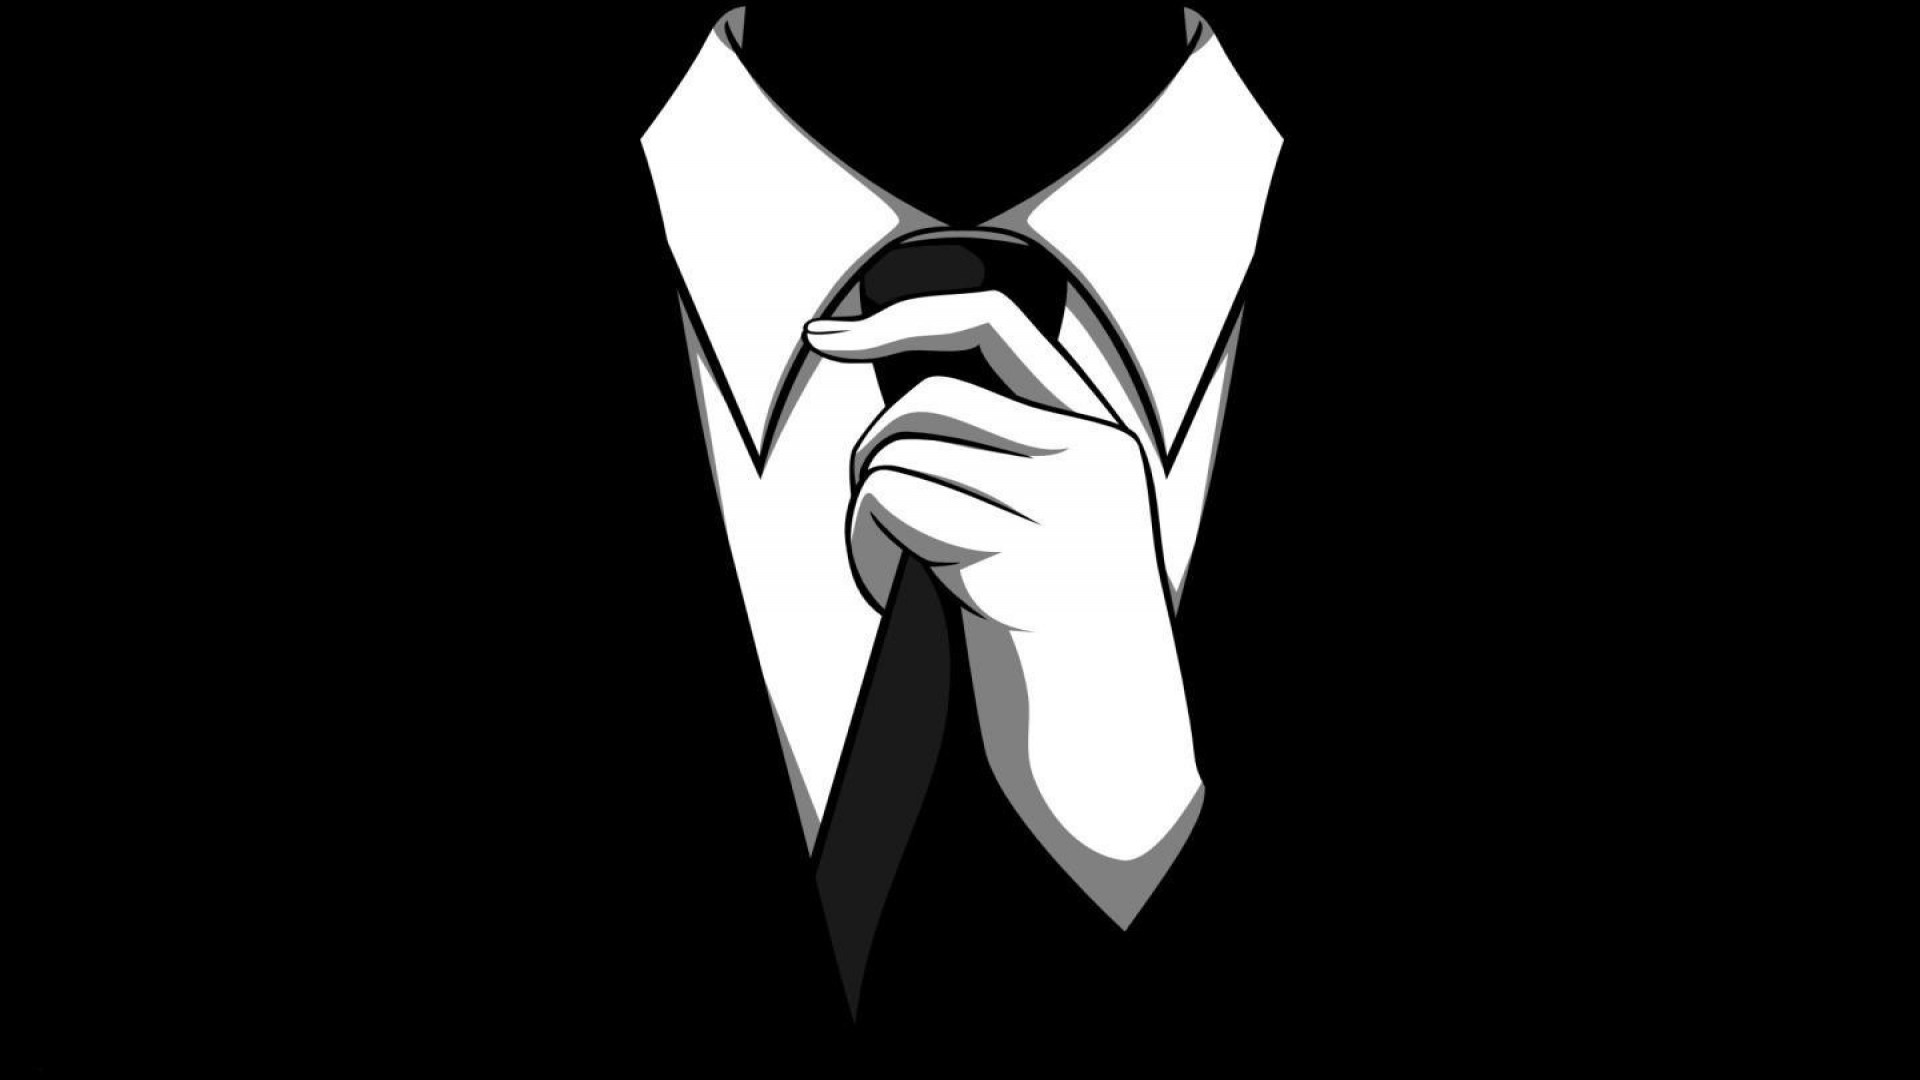 awesome wallpapers for guys,tie,suit,black and white,formal wear,font